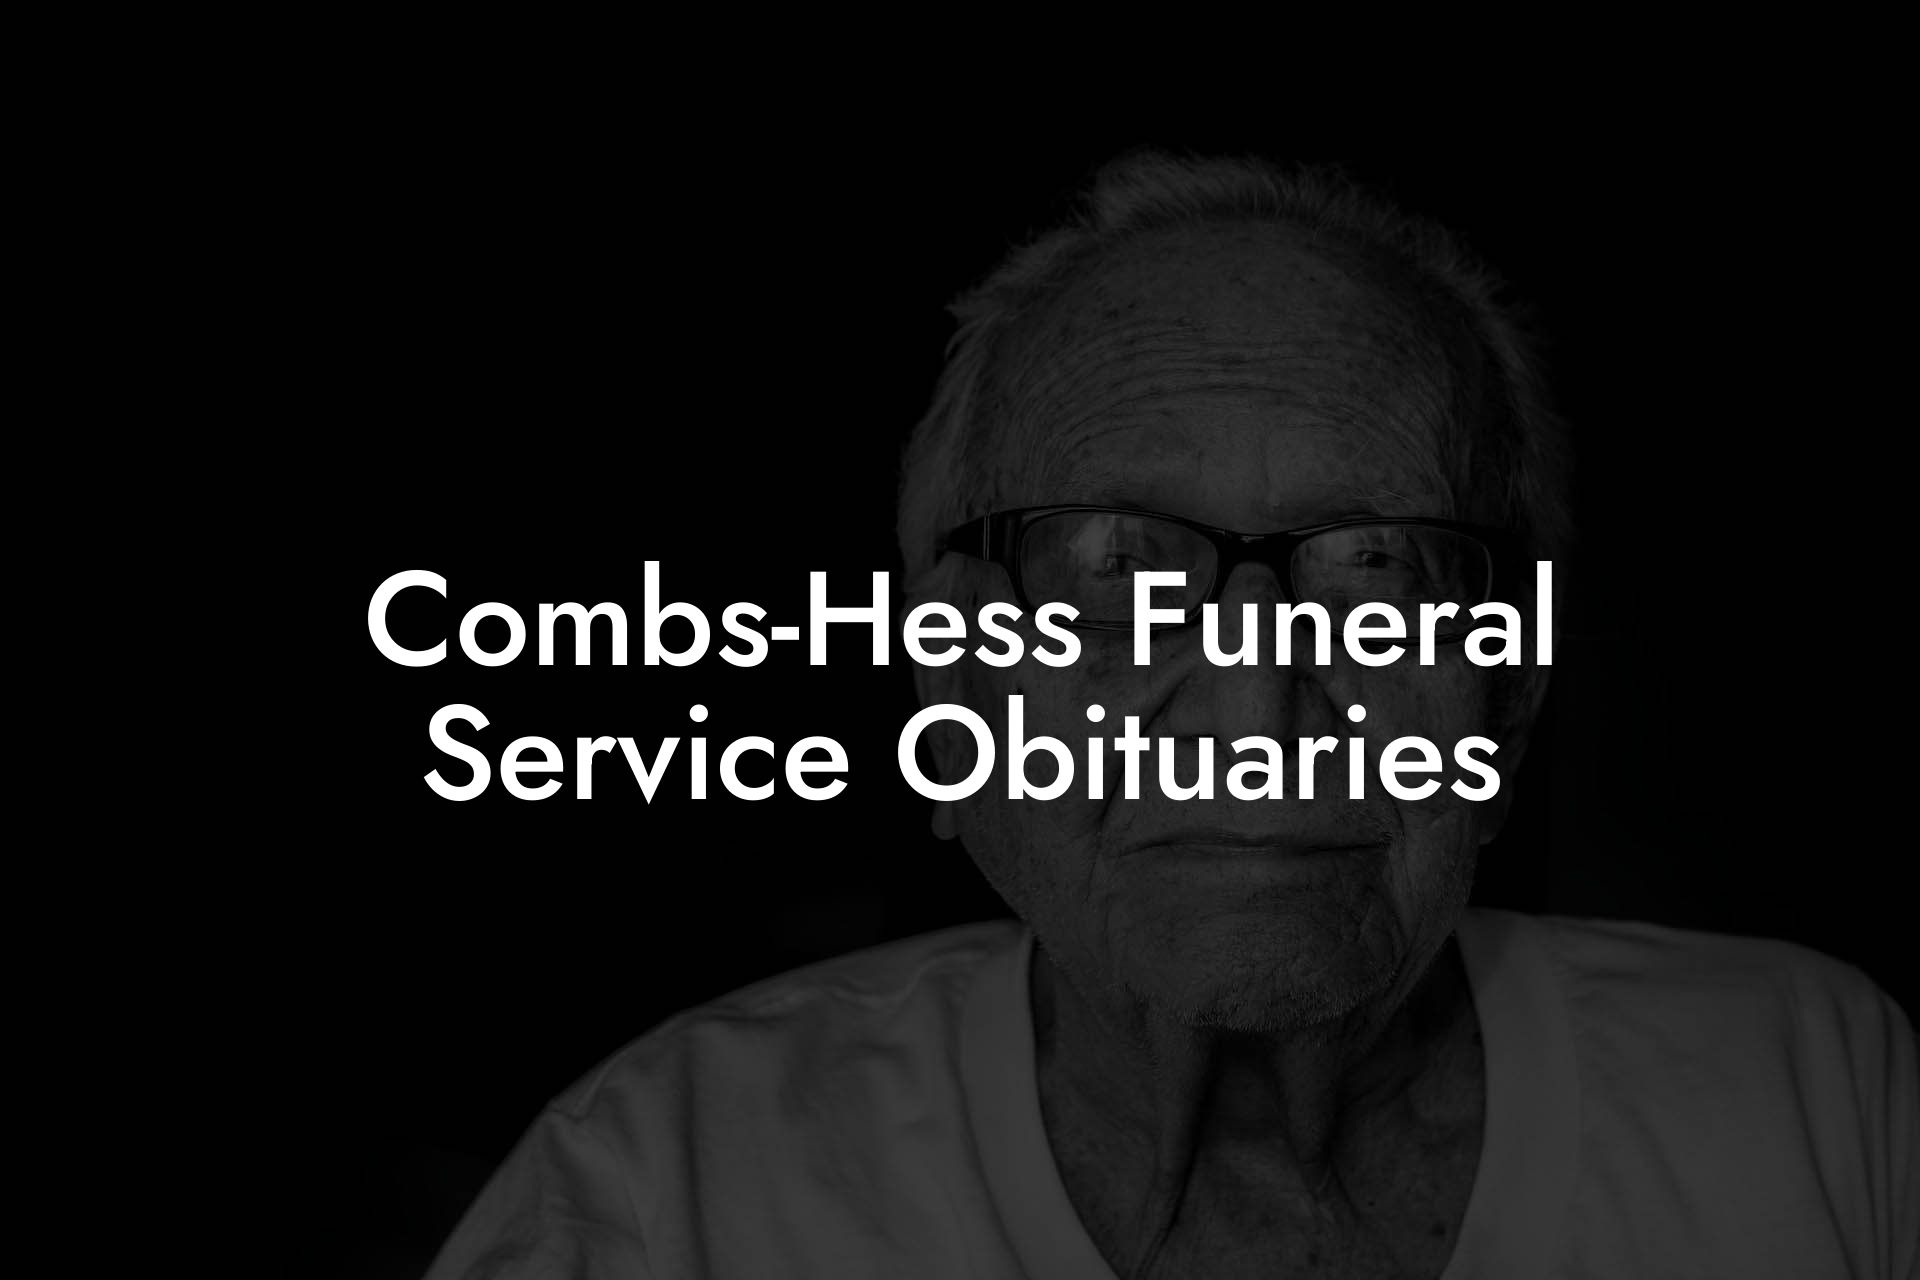 Combs-Hess Funeral Service Obituaries